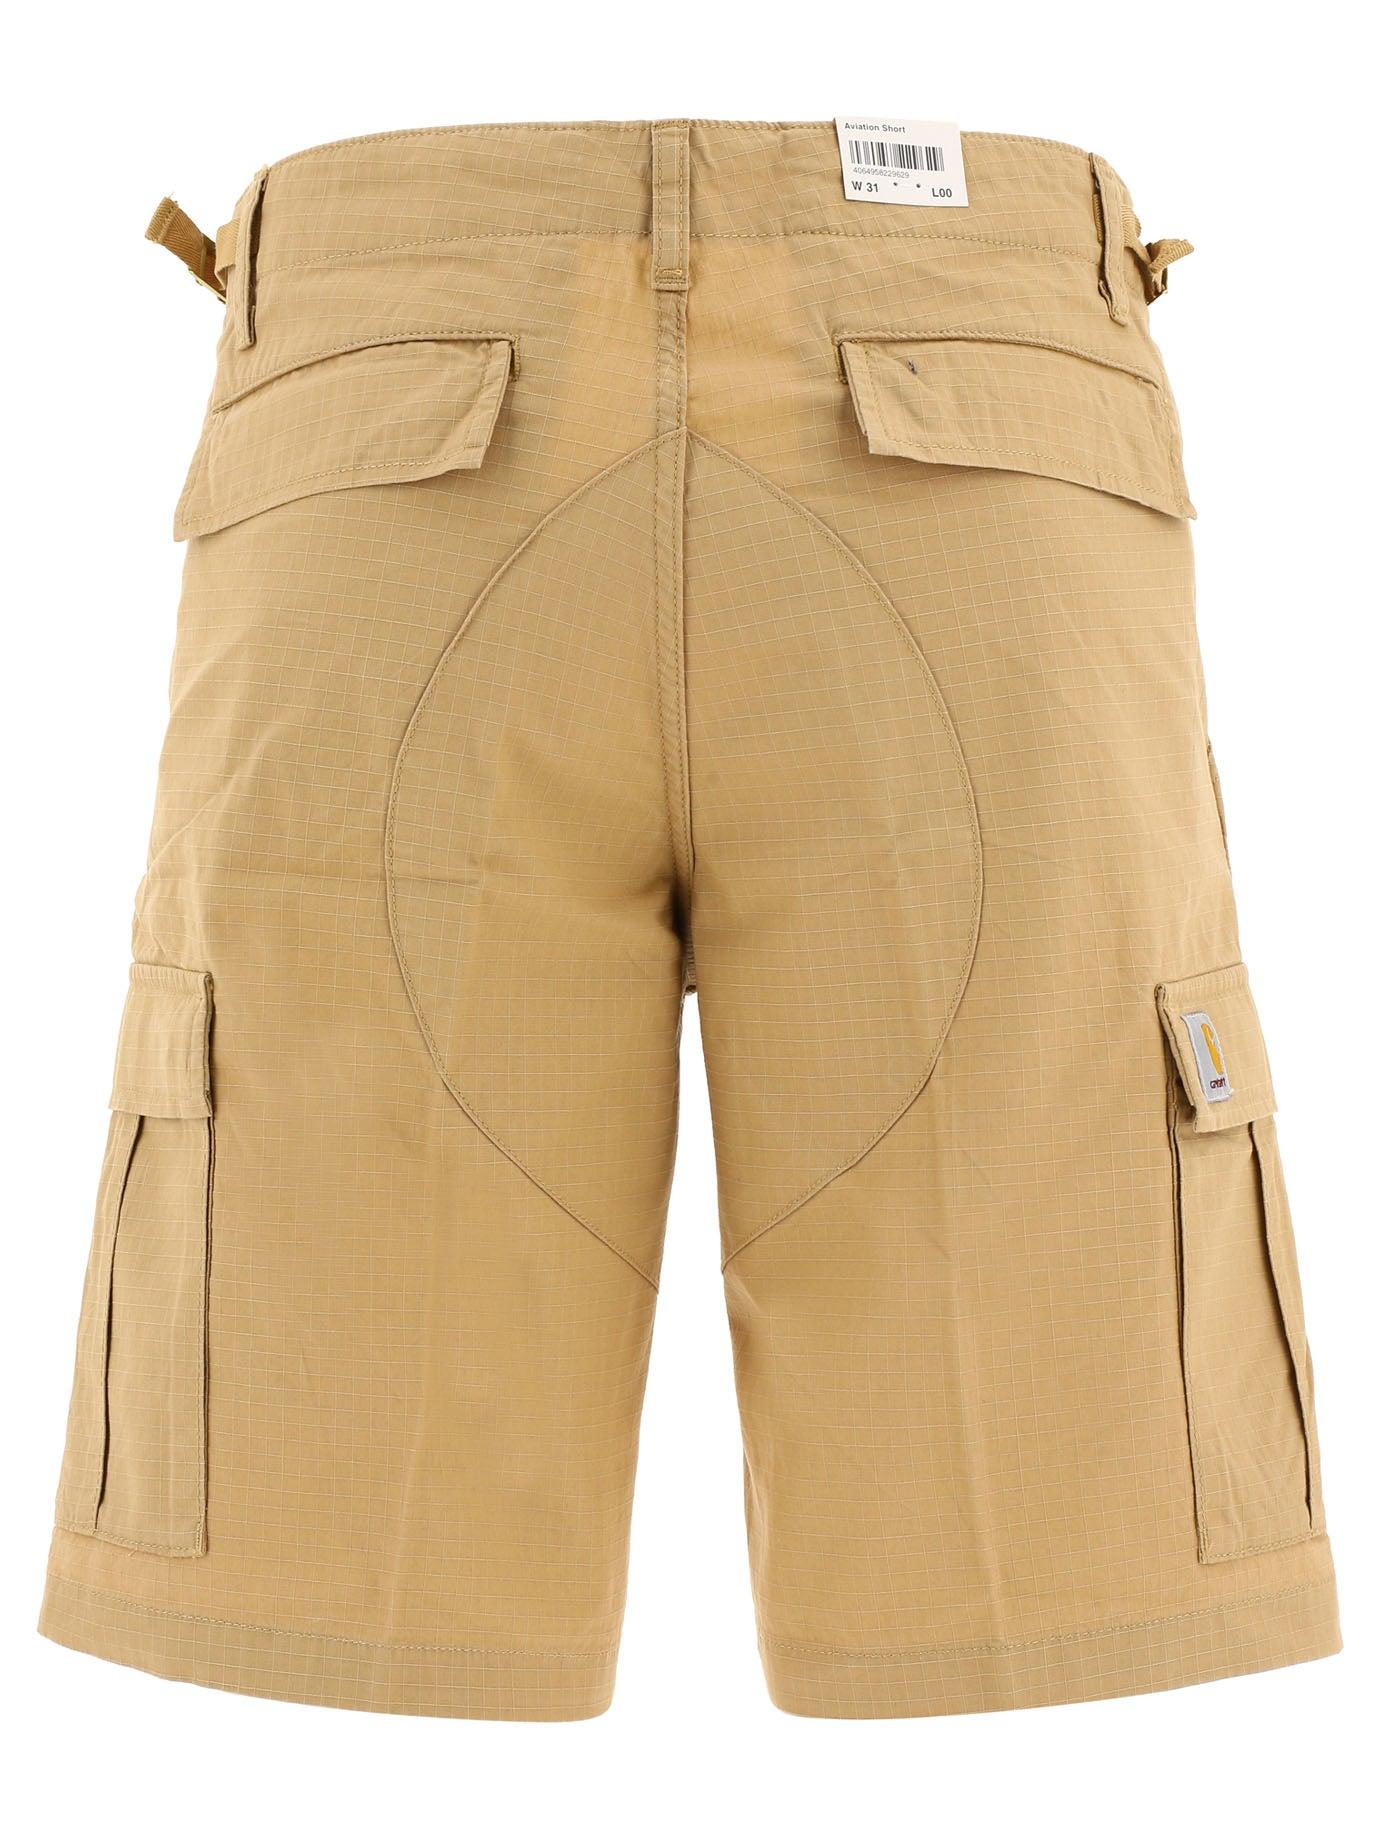 Carhartt WIP "aviation" Shorts in Natural for Men | Lyst